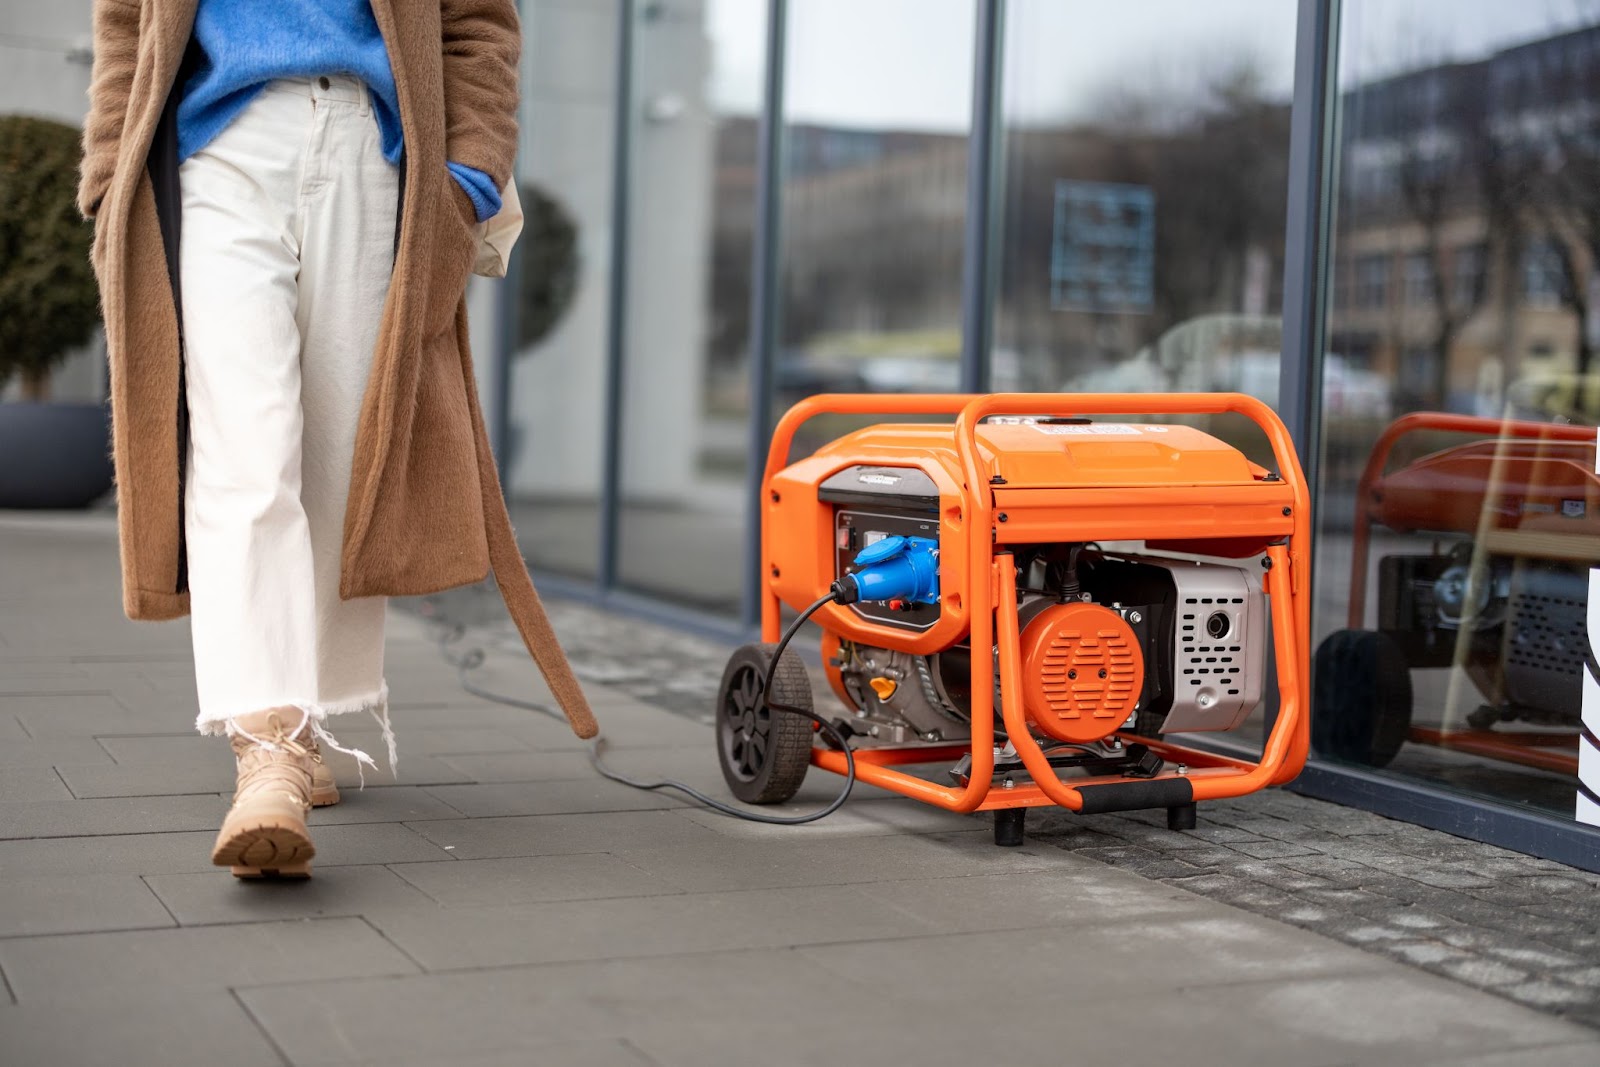 A portable generator outside a building.